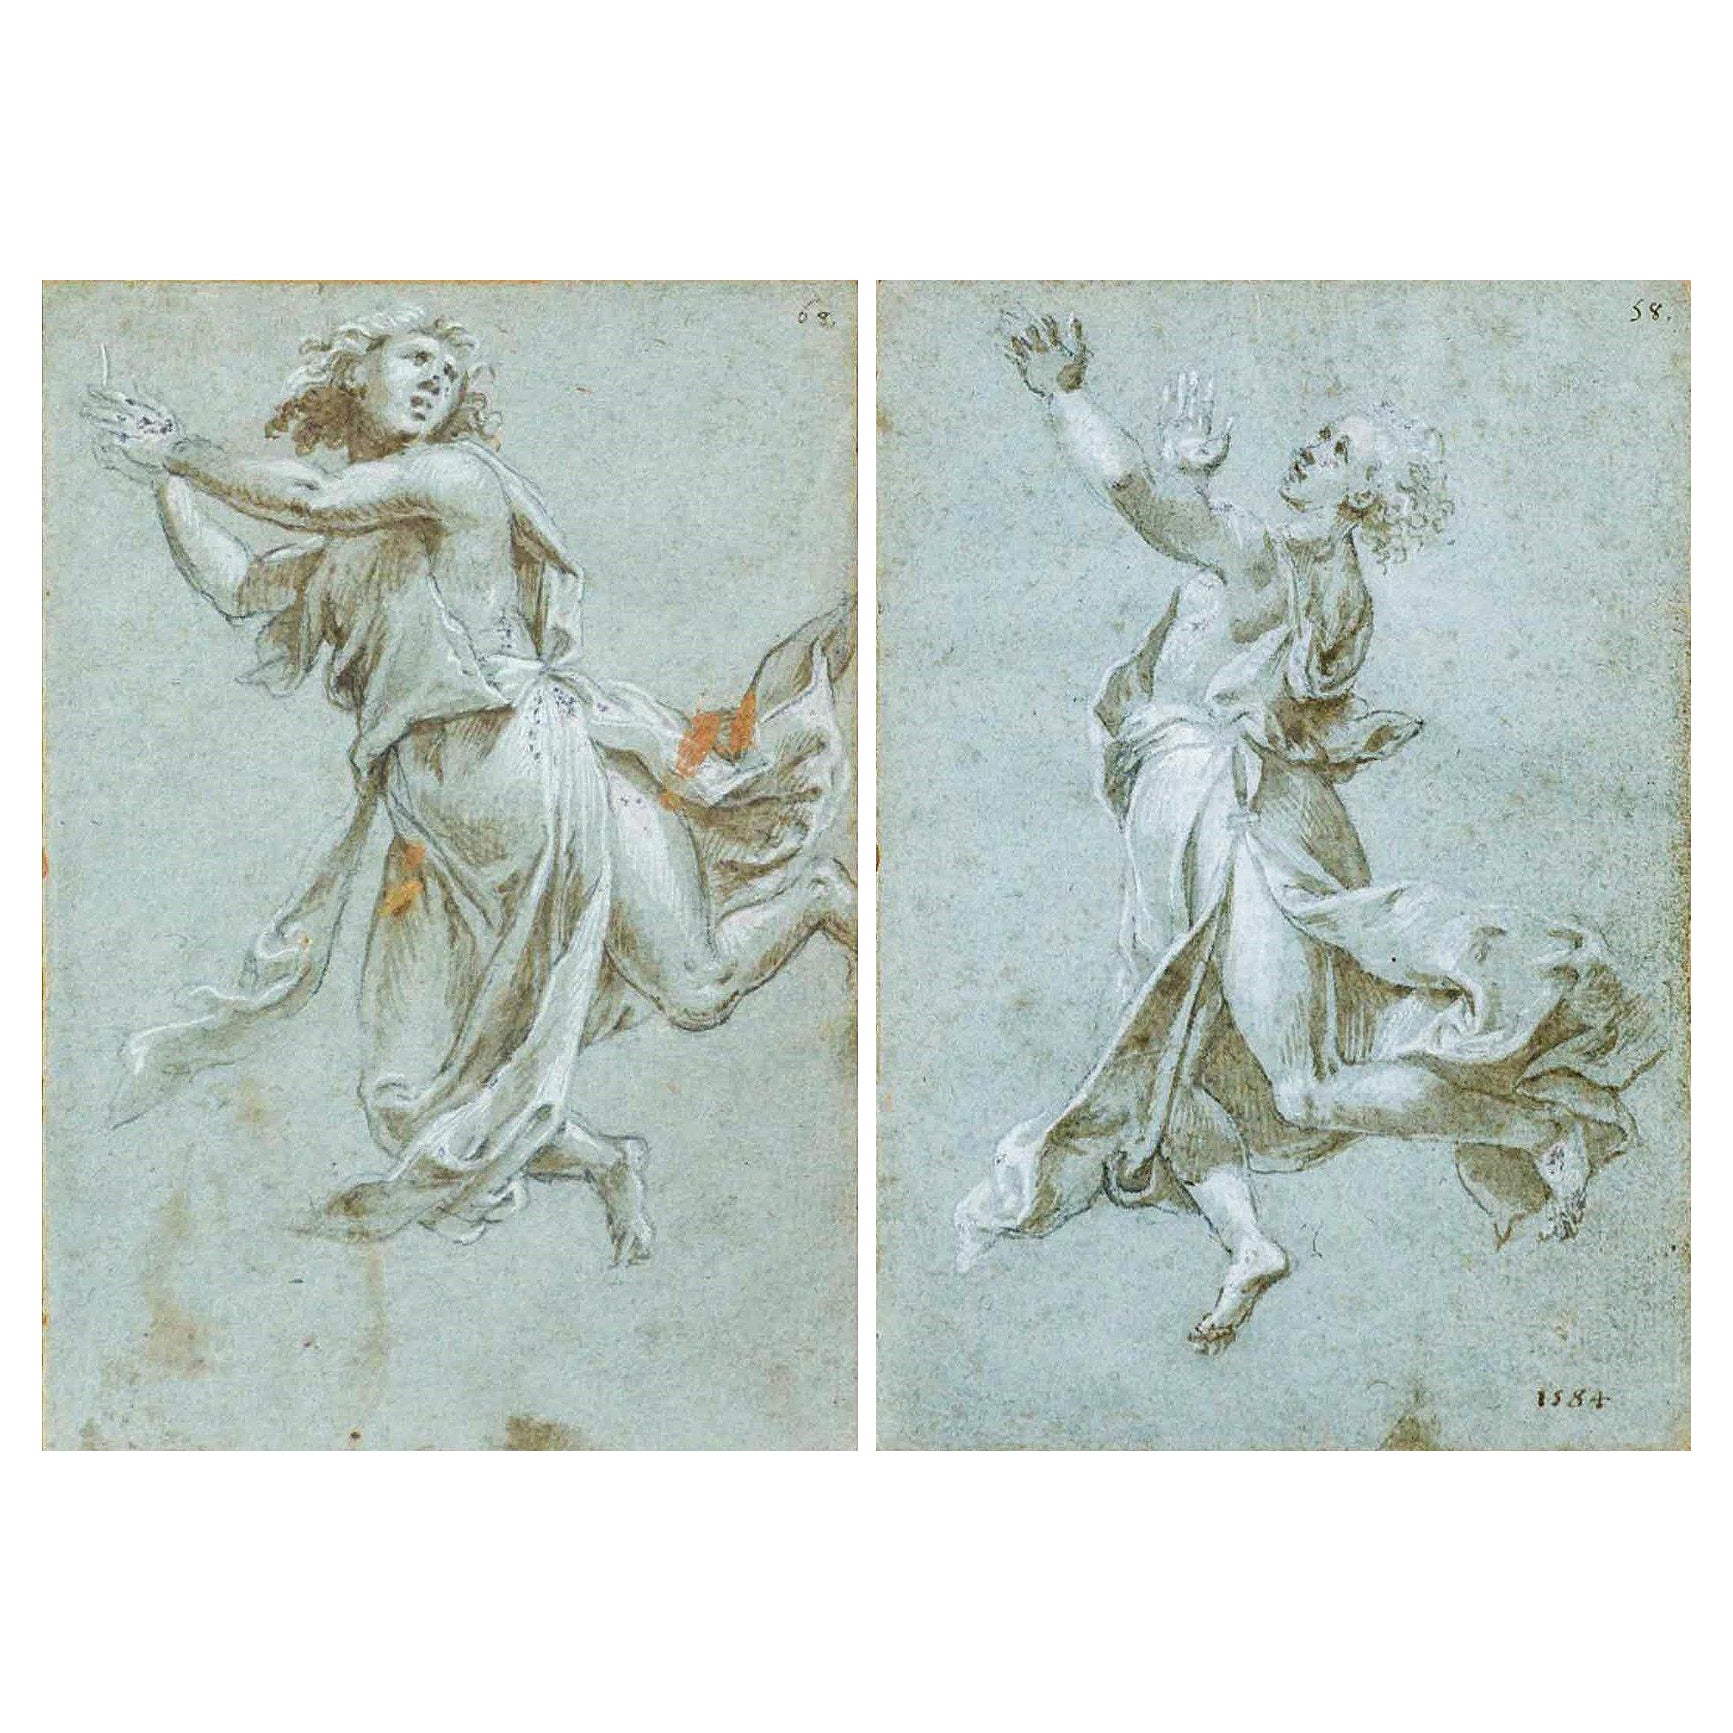 Two Italian Renaissance Sketches of Angels in Adoration by Carlo Urbino